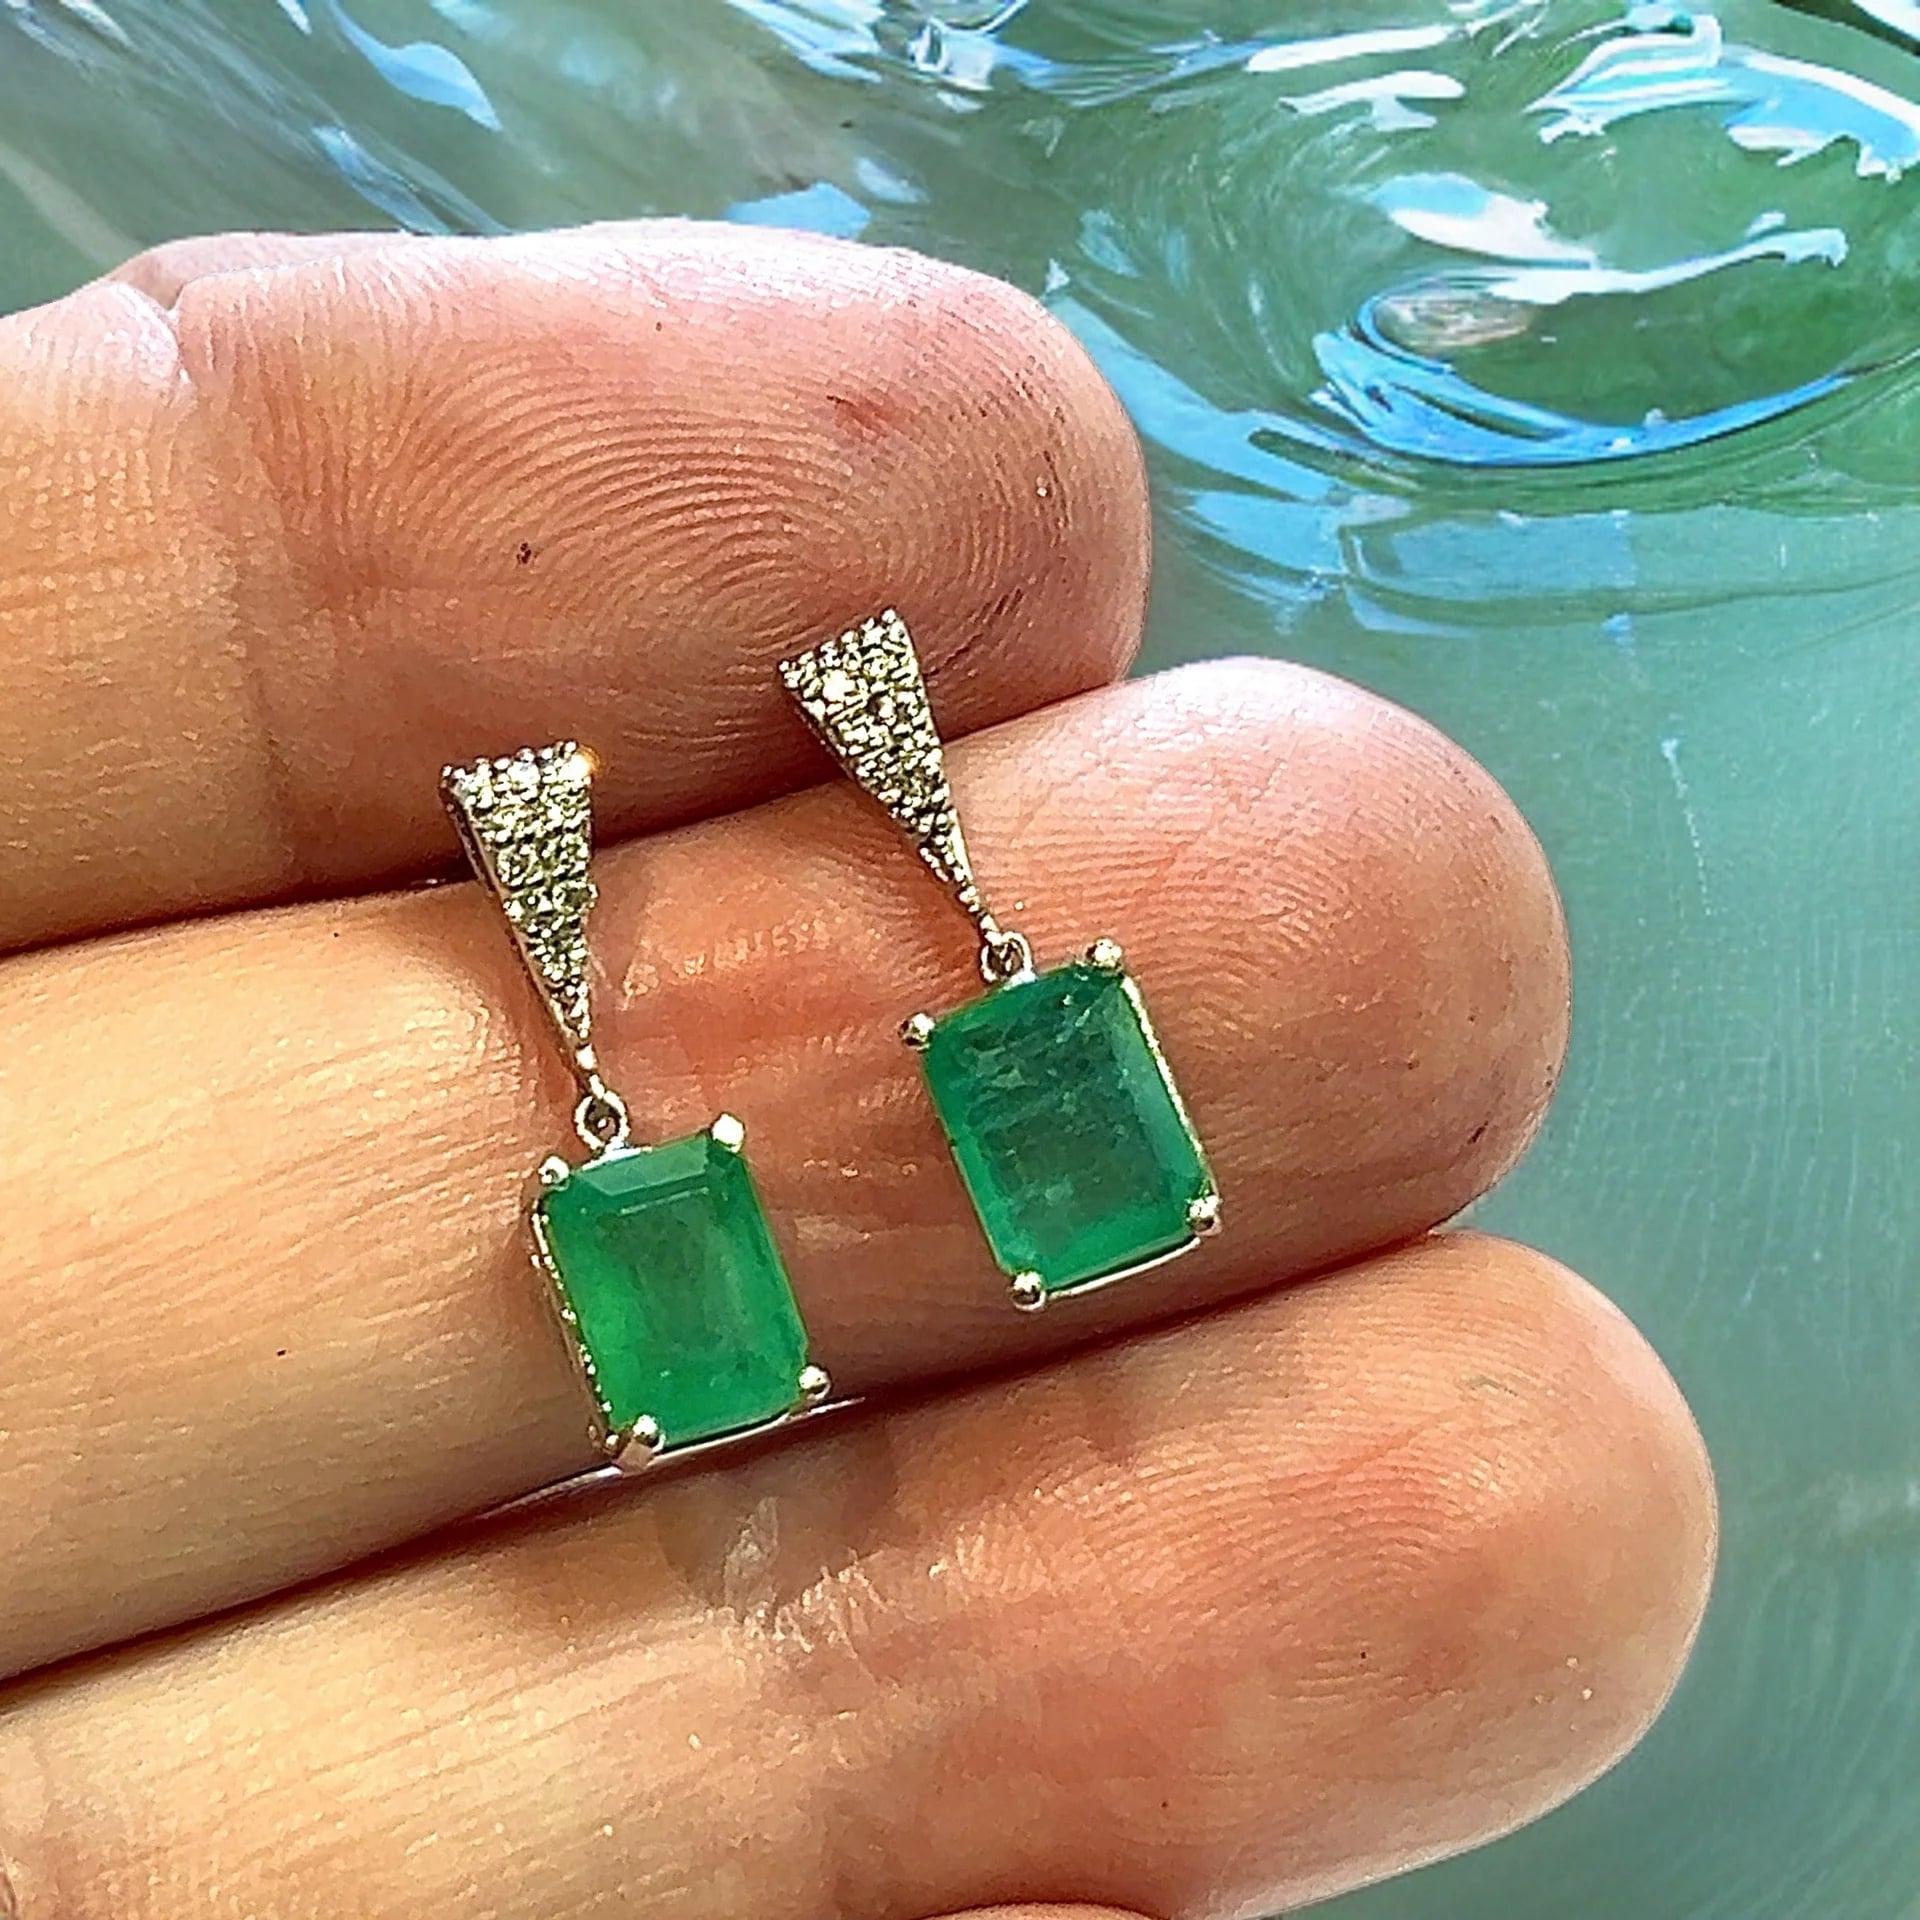 Natural Finely Faceted Quality Emerald Diamond Dangle Earrings 14k WG 2.99 TCW Certified $4,950 111889

Please look at the video attached for this item. With the video you can see the movement of the item and appreciate the faceting and details